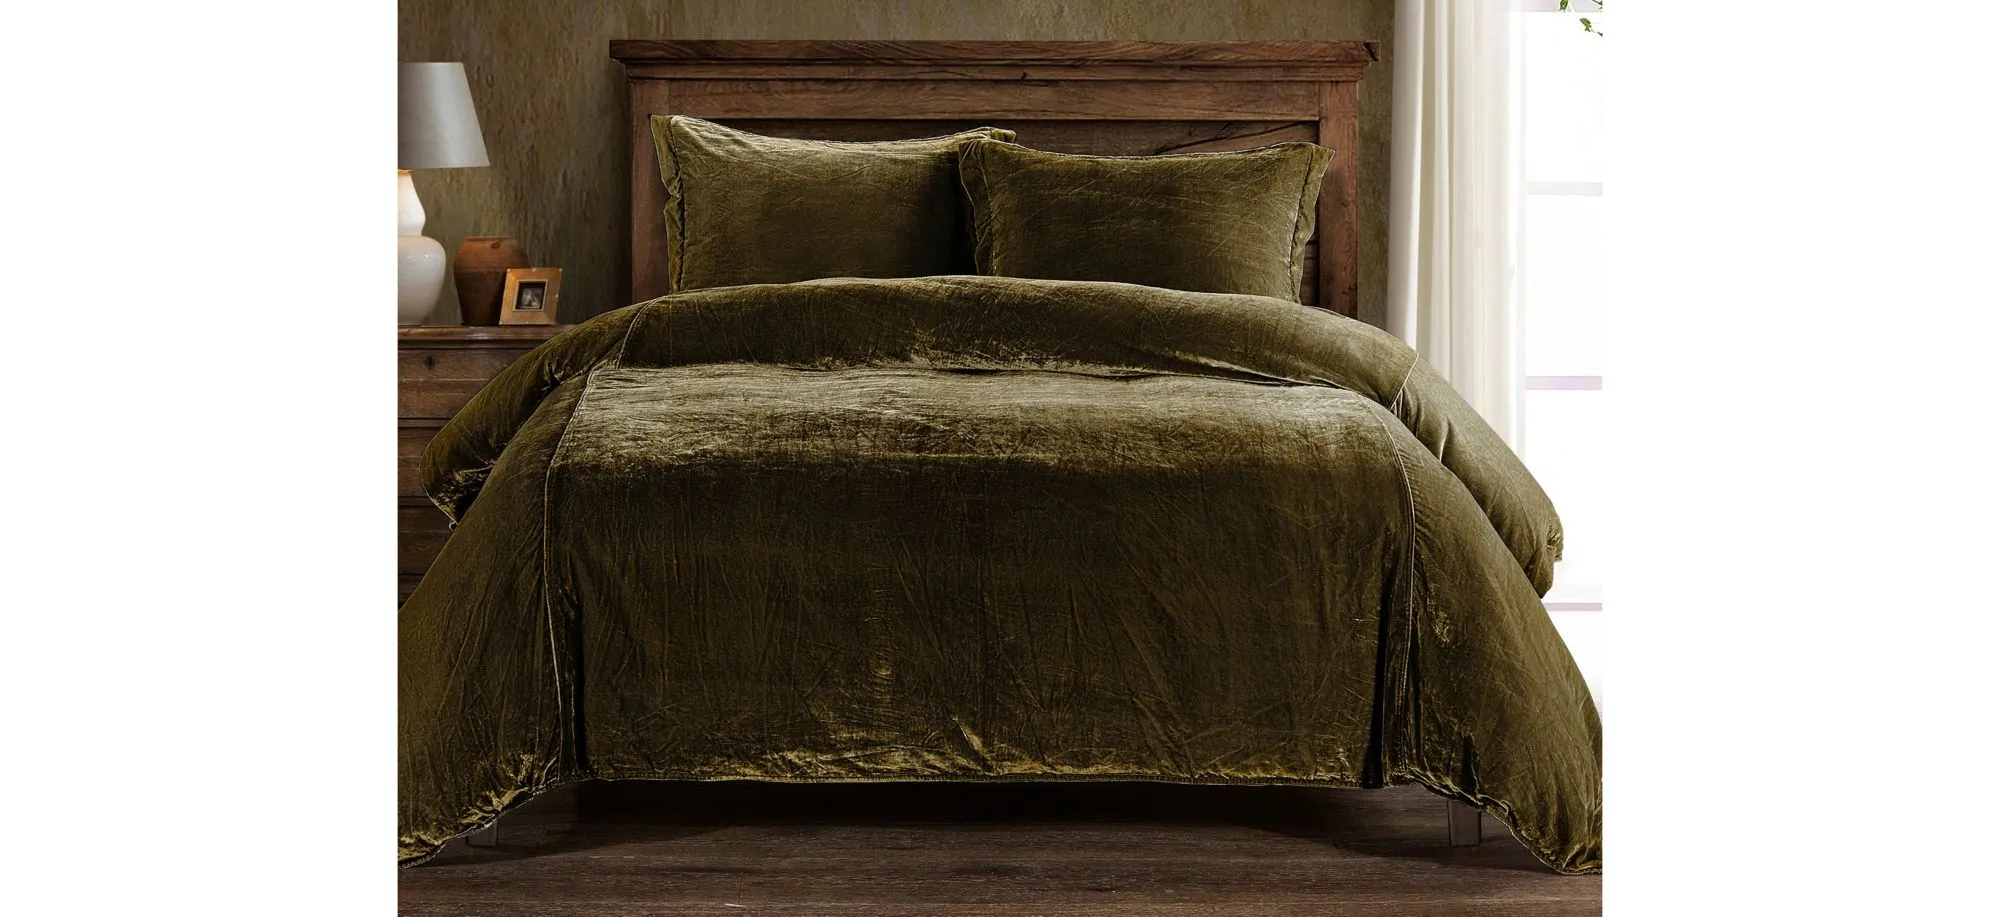 Sweet Delights 3-pc. Duvet Cover Set in Green Ochre by HiEnd Accents